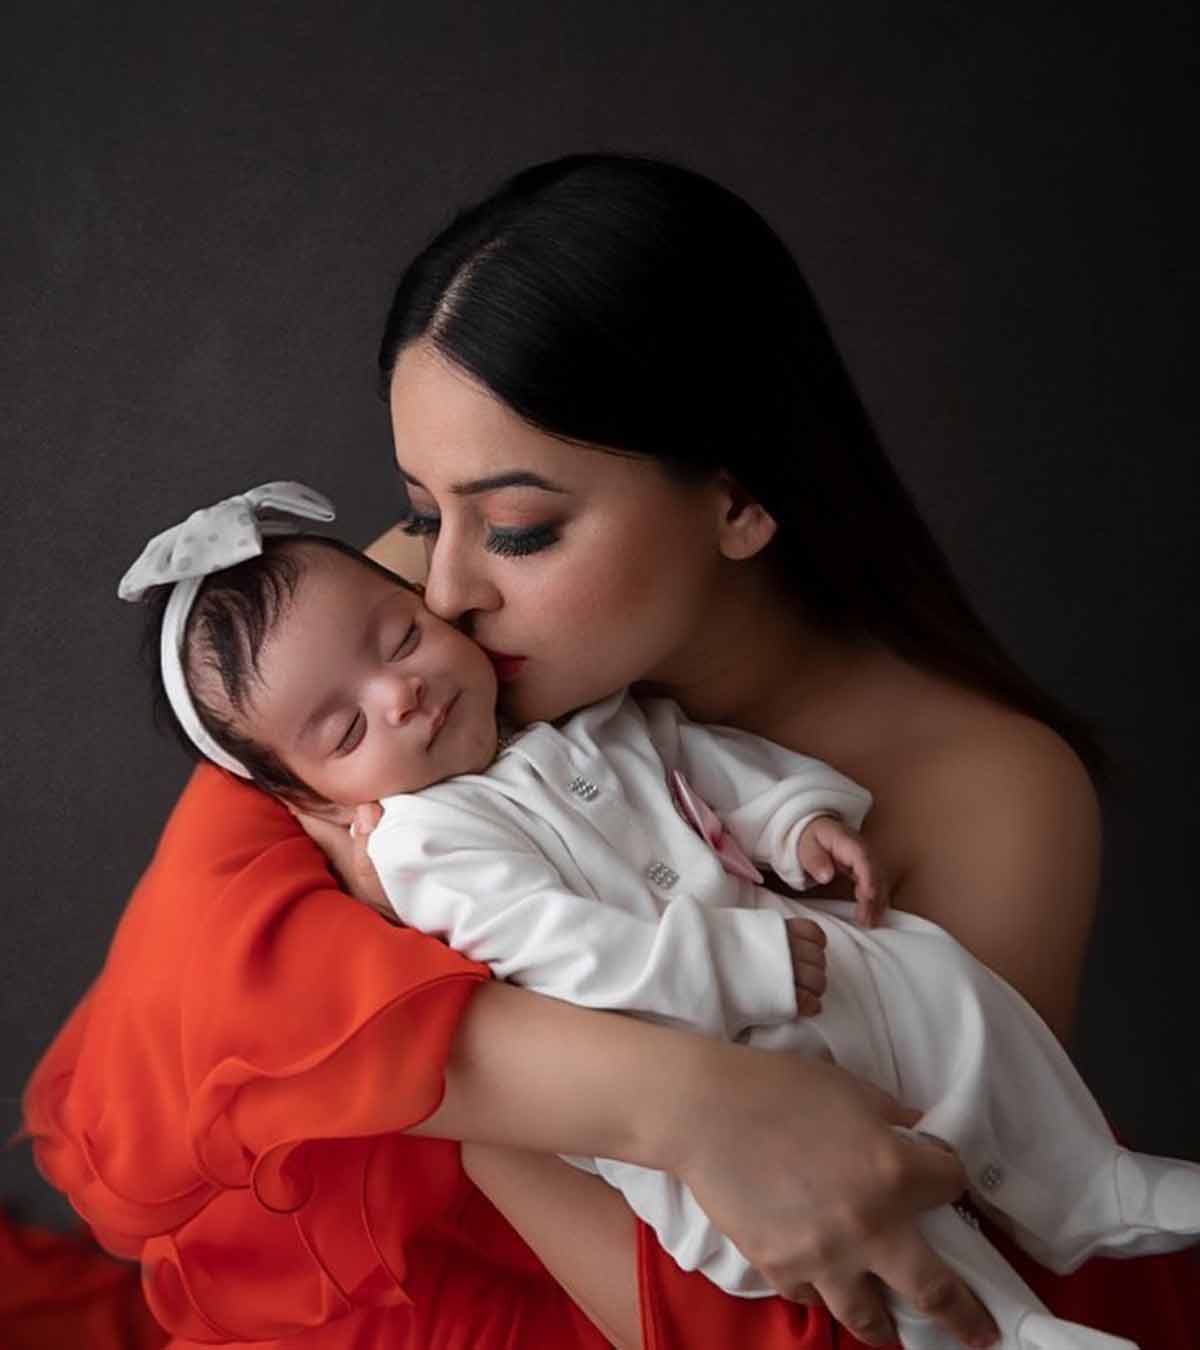 Mahhi Vij Narrates Her Body-Shaming Experience, Says She Is Proud Of Her C-Section Scar